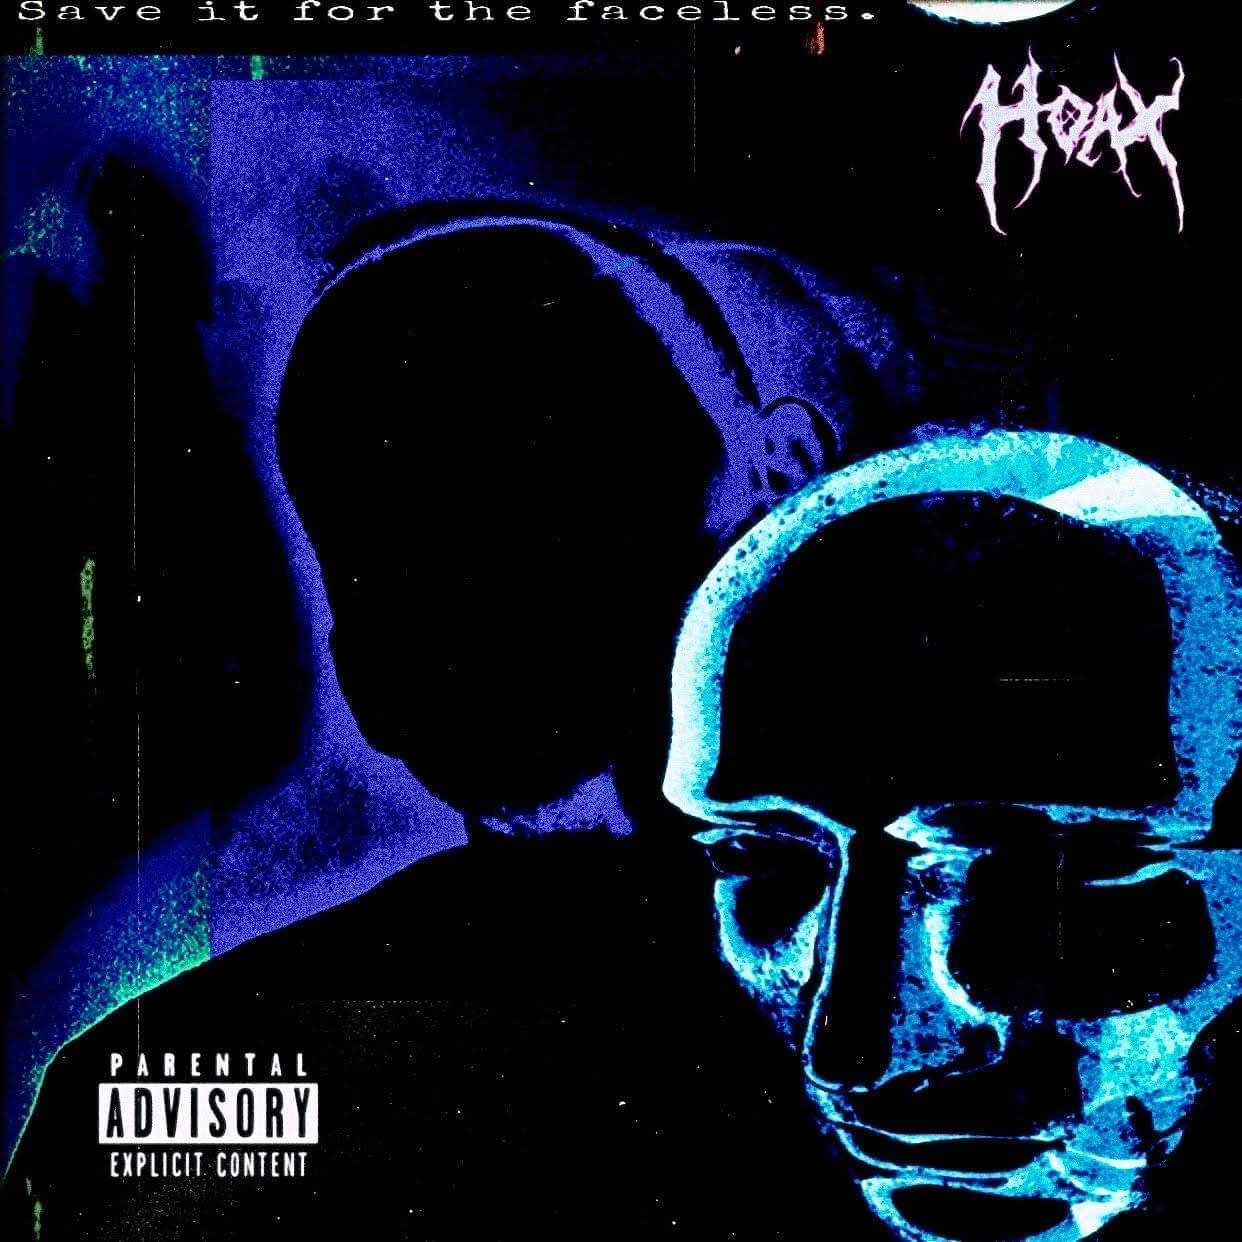 HOAX “Save It For The Faceless” (CD)